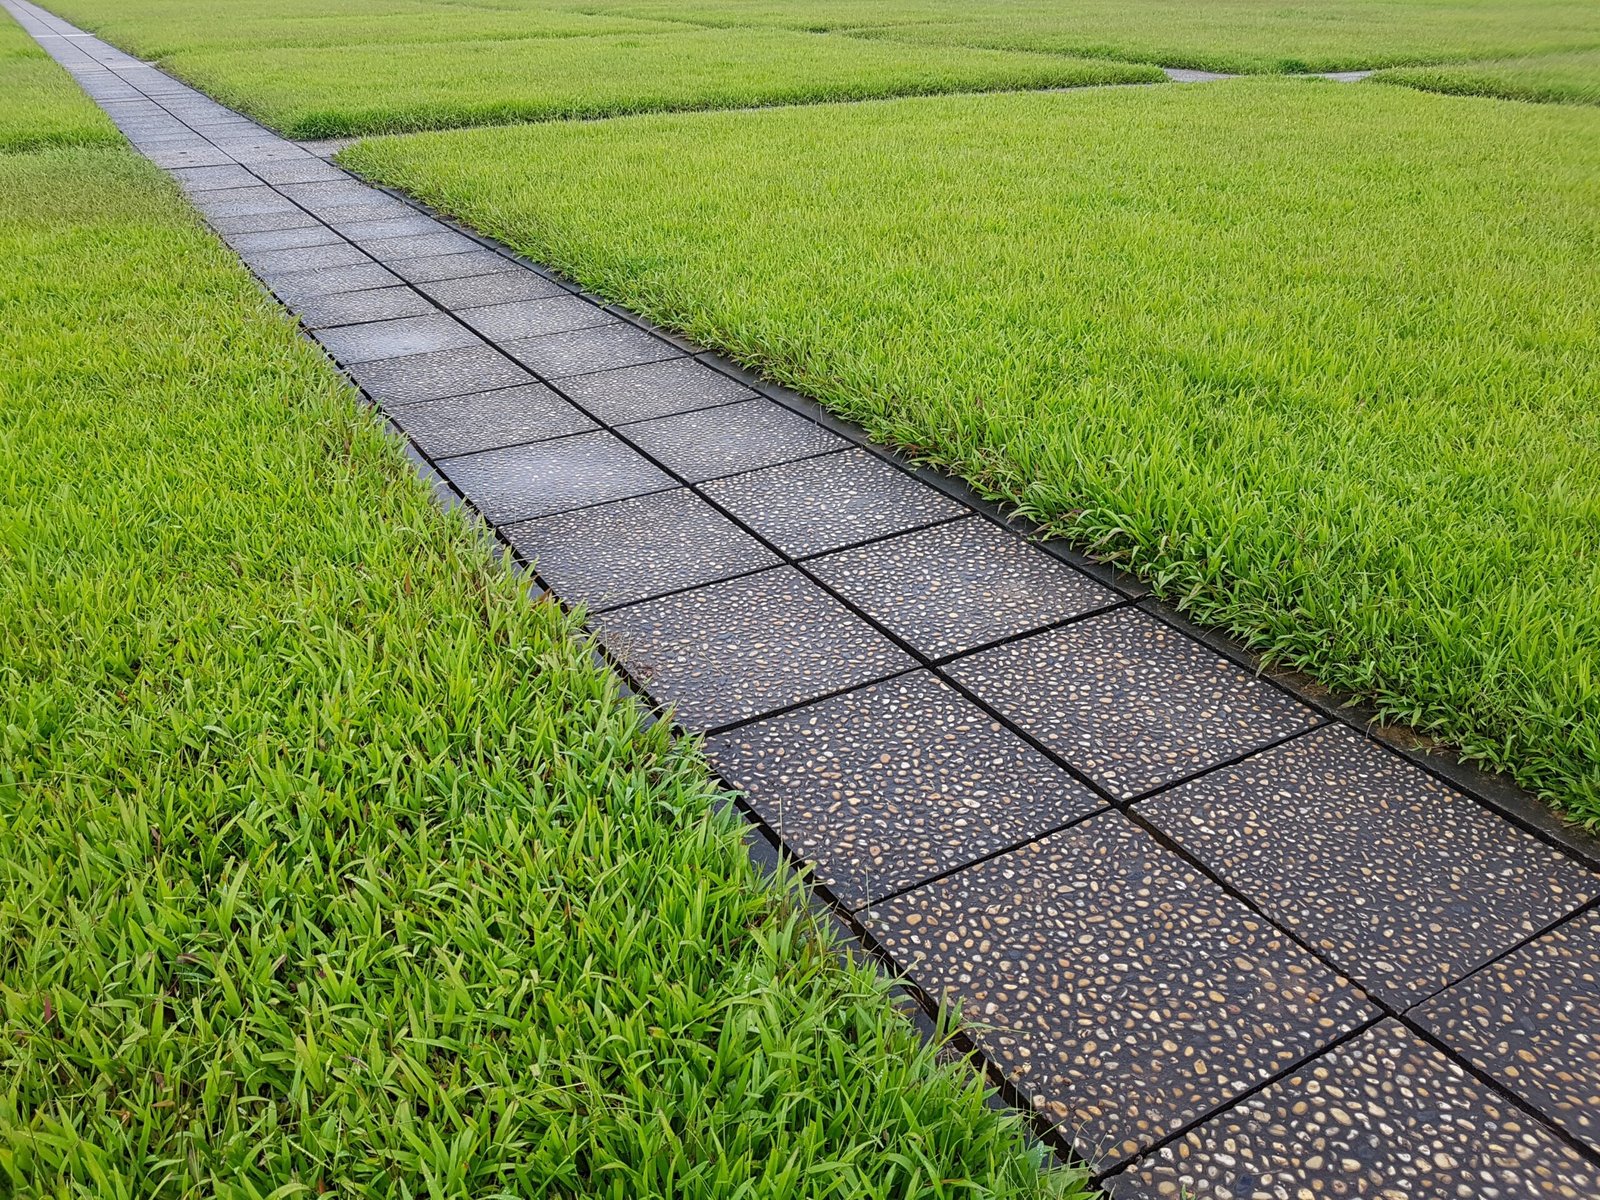 Why Choose Pave-N-Turf for Your Landscaping Project? Expert Solutions for Outdoor Excellence